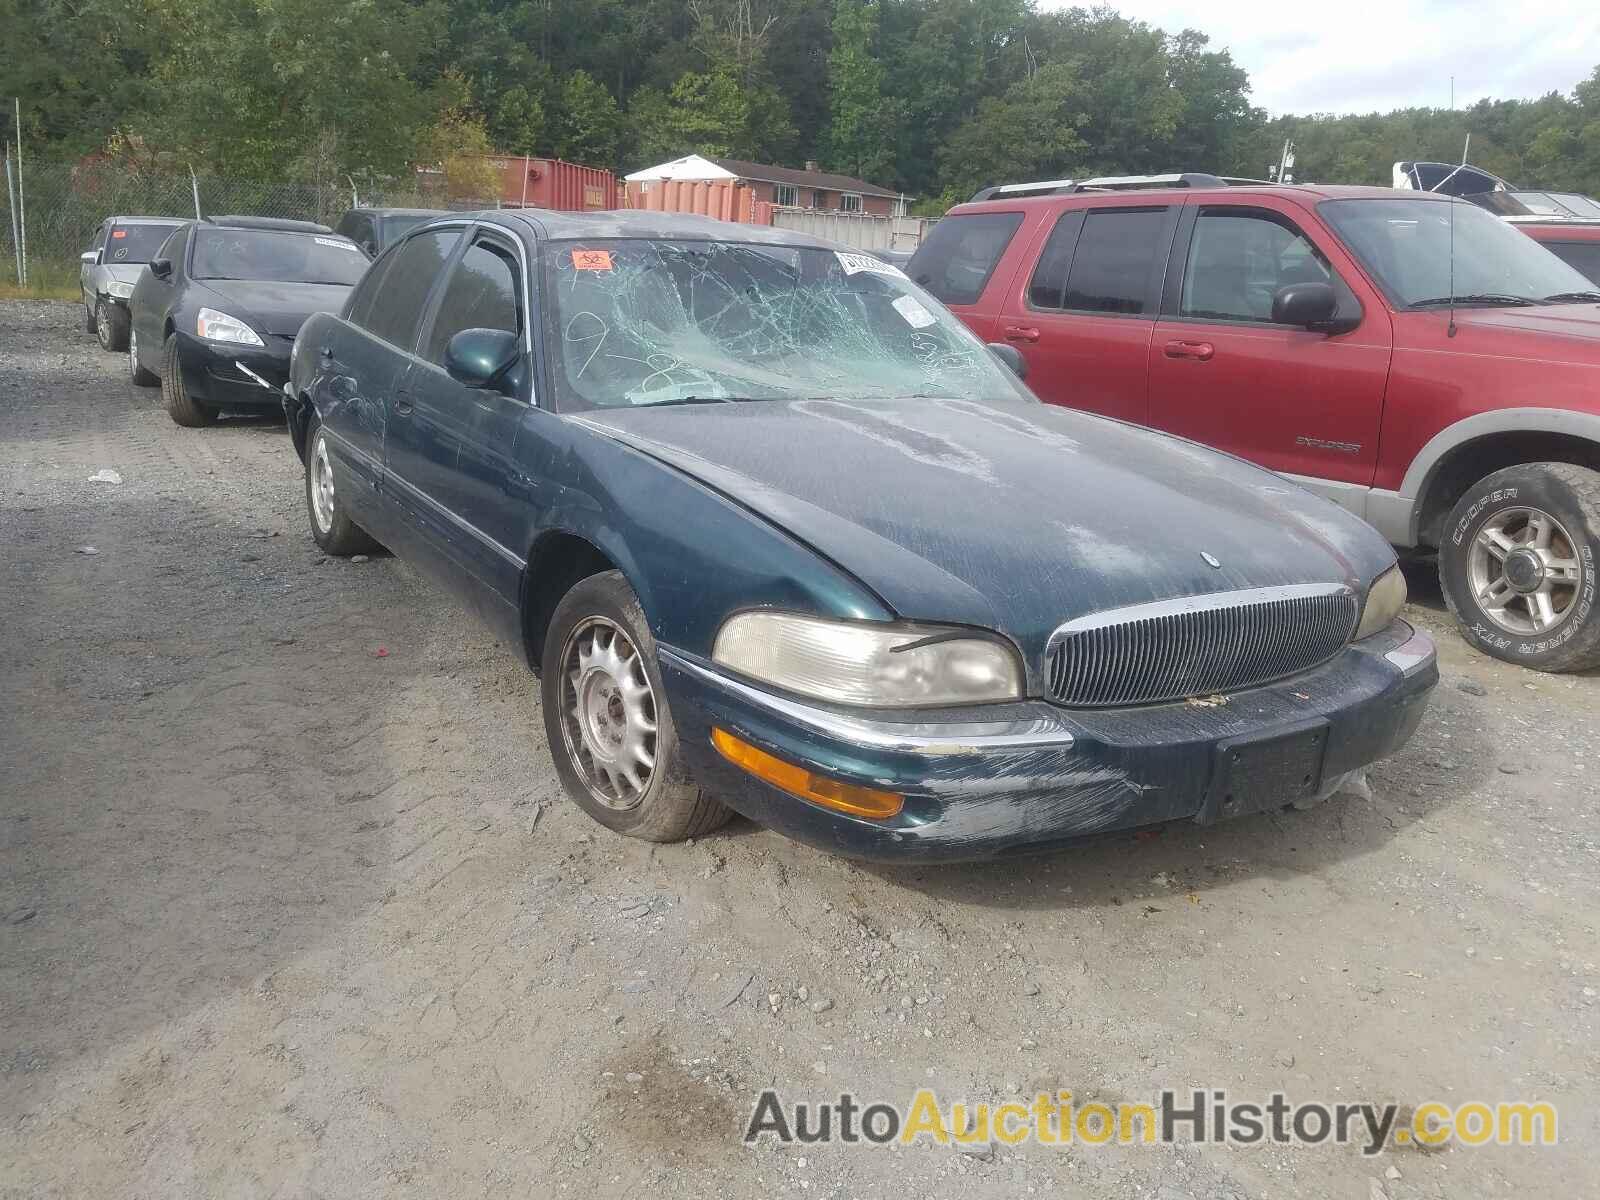 1998 BUICK PARK AVE, 1G4CW52K8W4646147